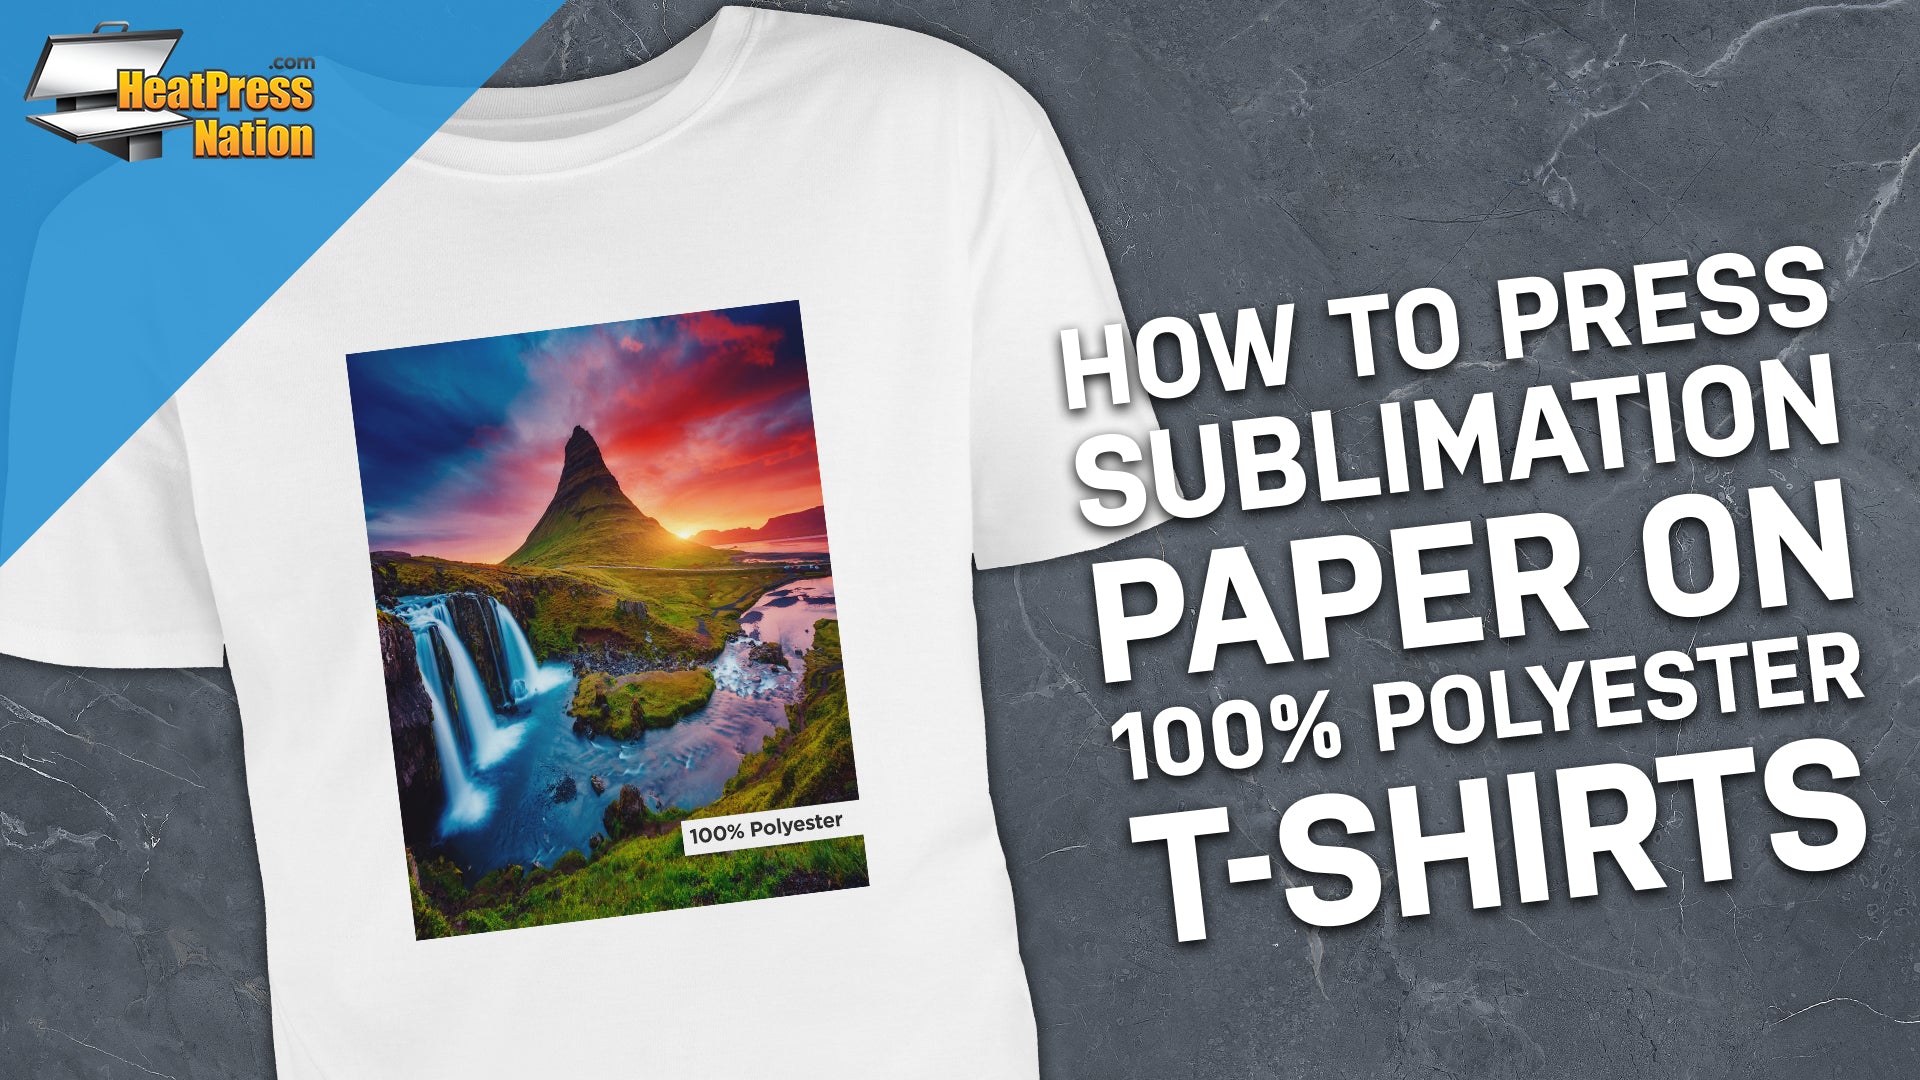 About Sublimation - What is Sublimation and how do you get started?